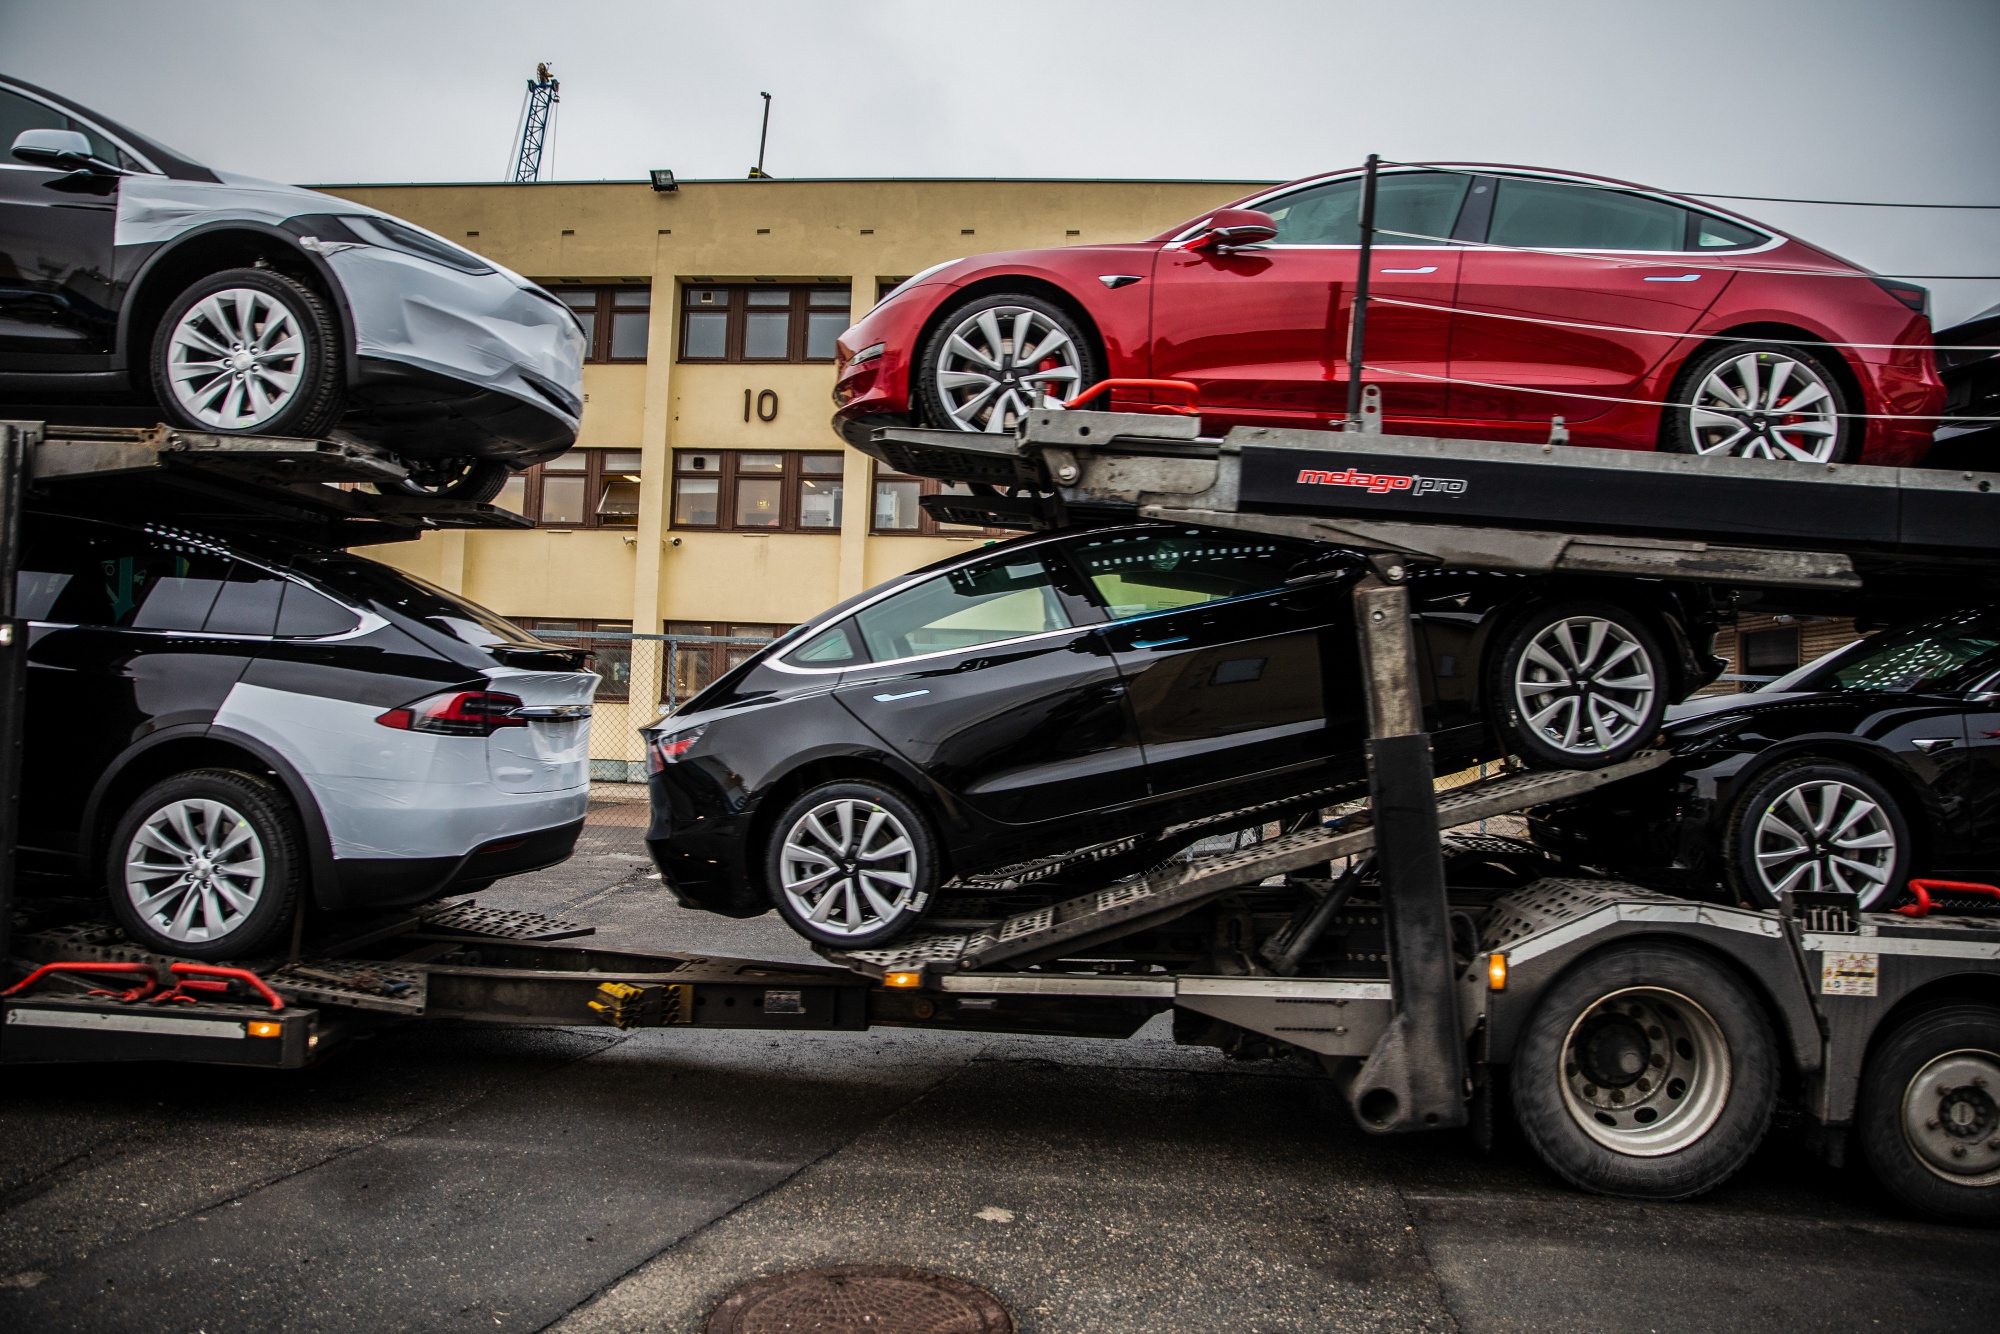 Auto Transport for the Tesla Model S